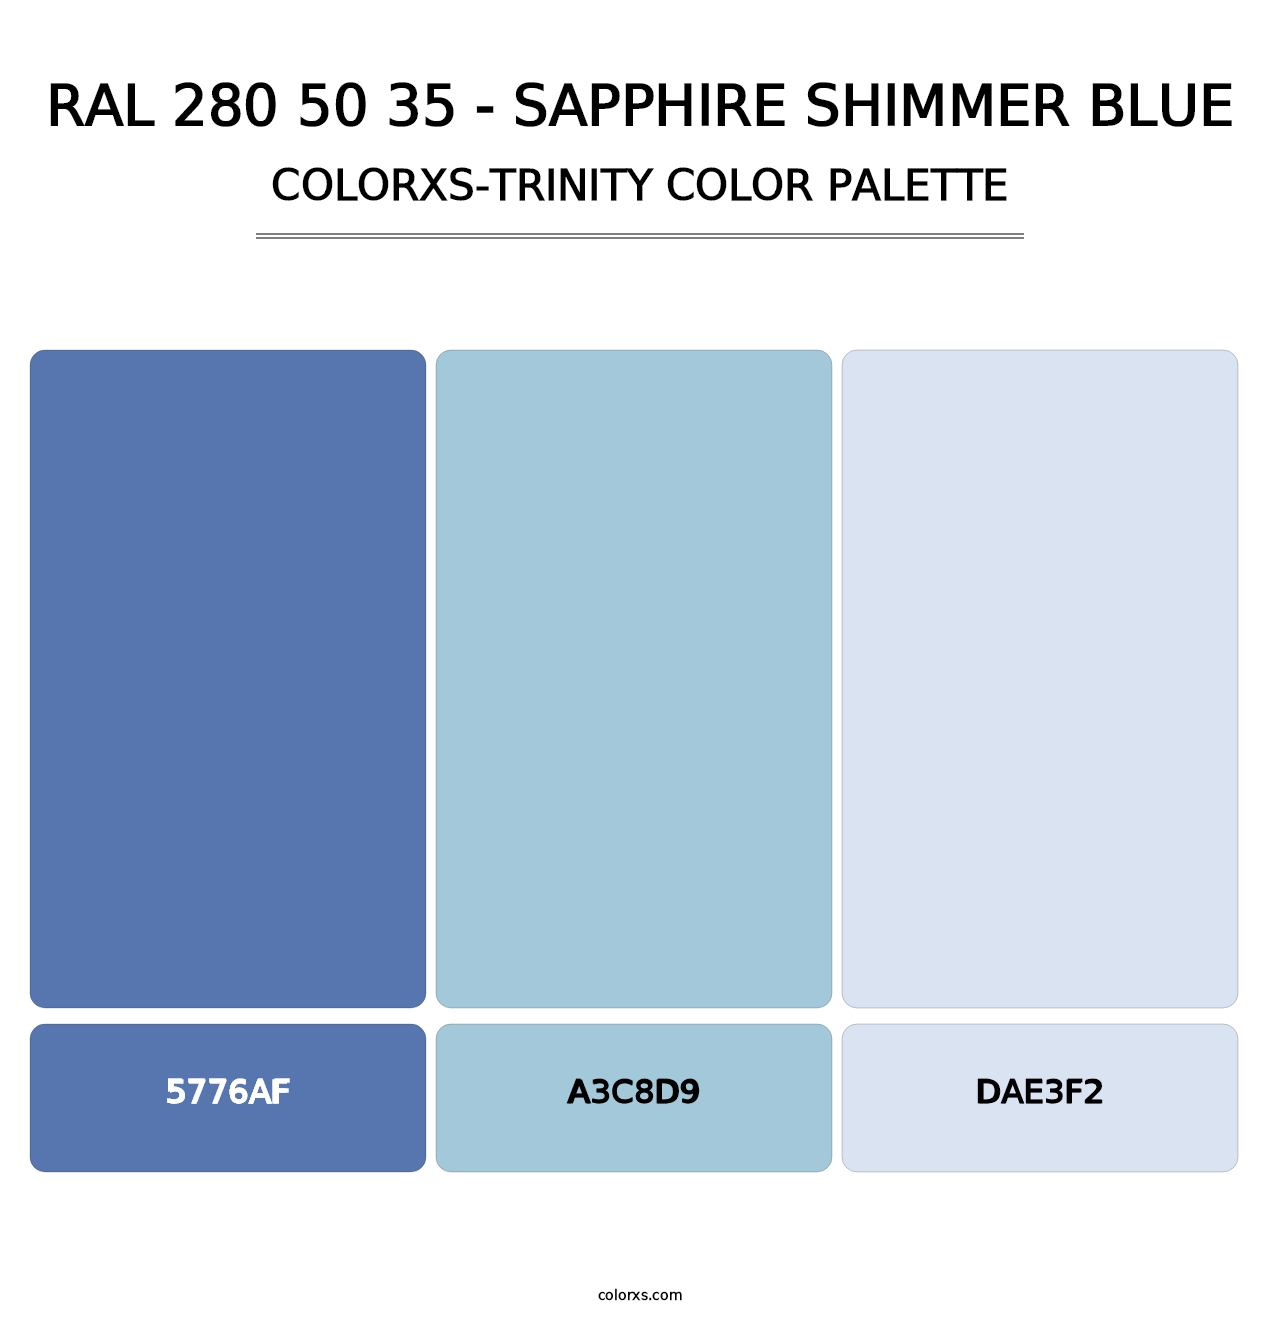 RAL 280 50 35 - Sapphire Shimmer Blue - Colorxs Trinity Palette